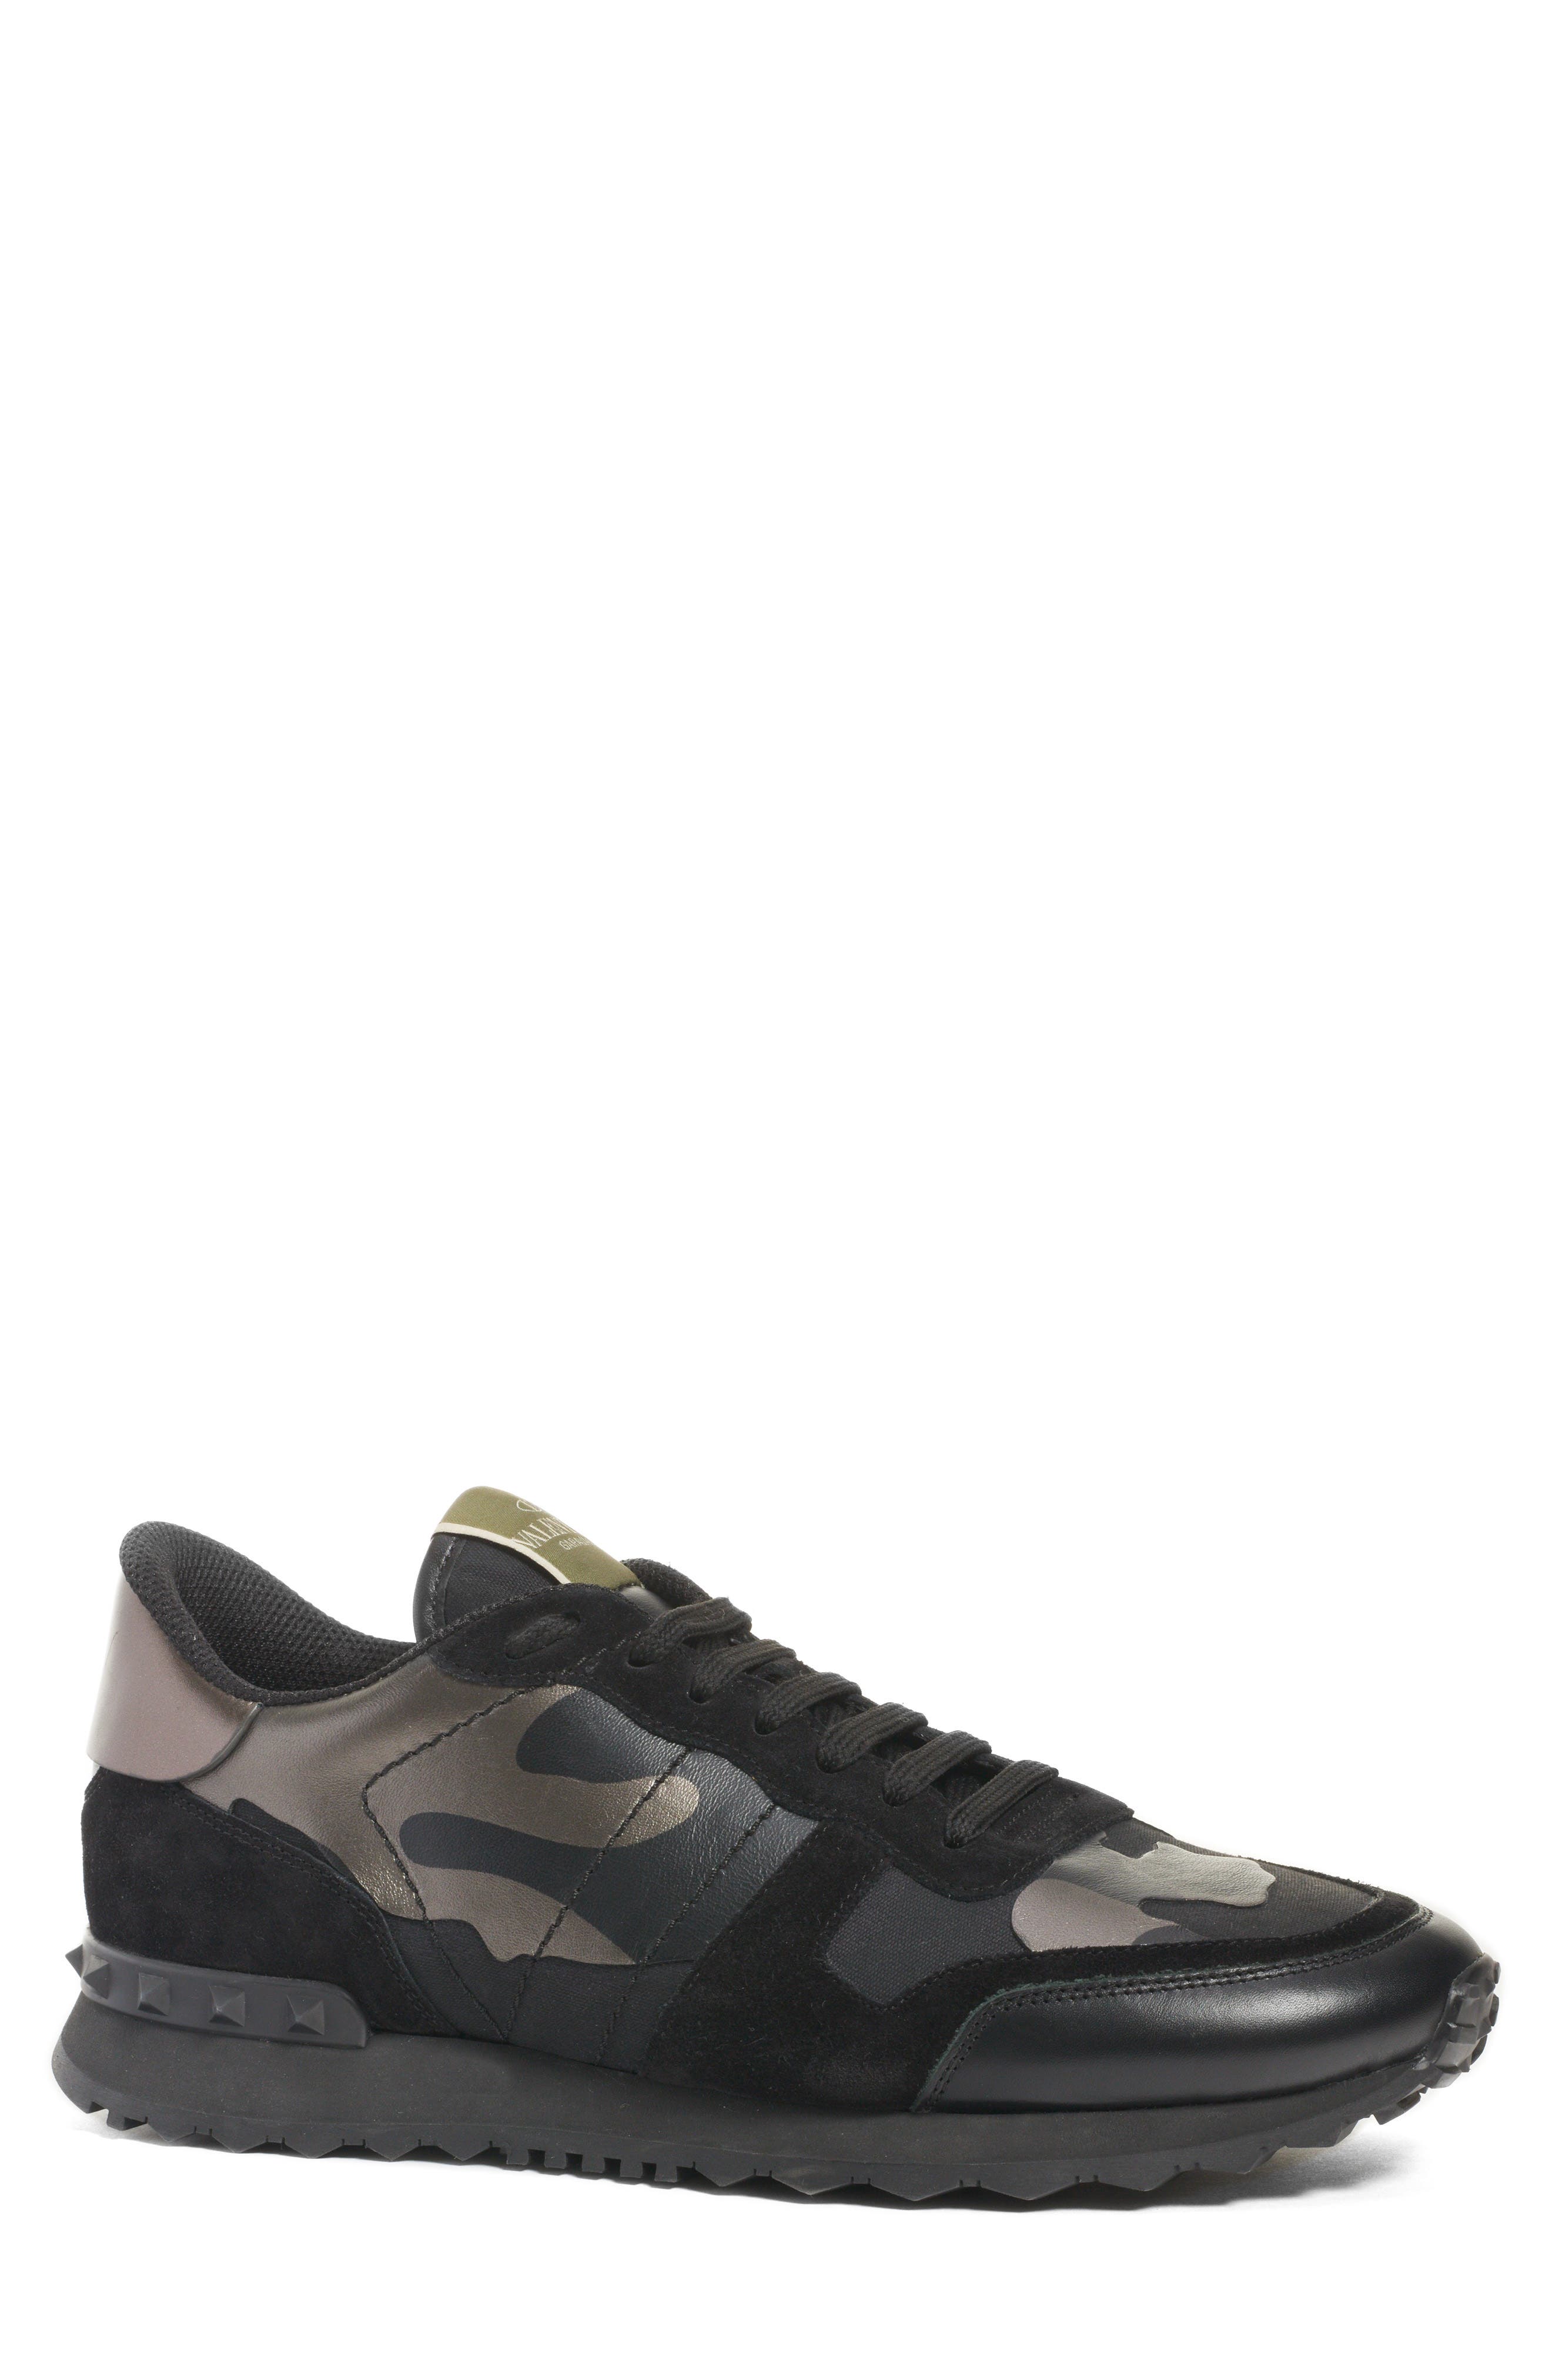 valentino sneakers camouflage black